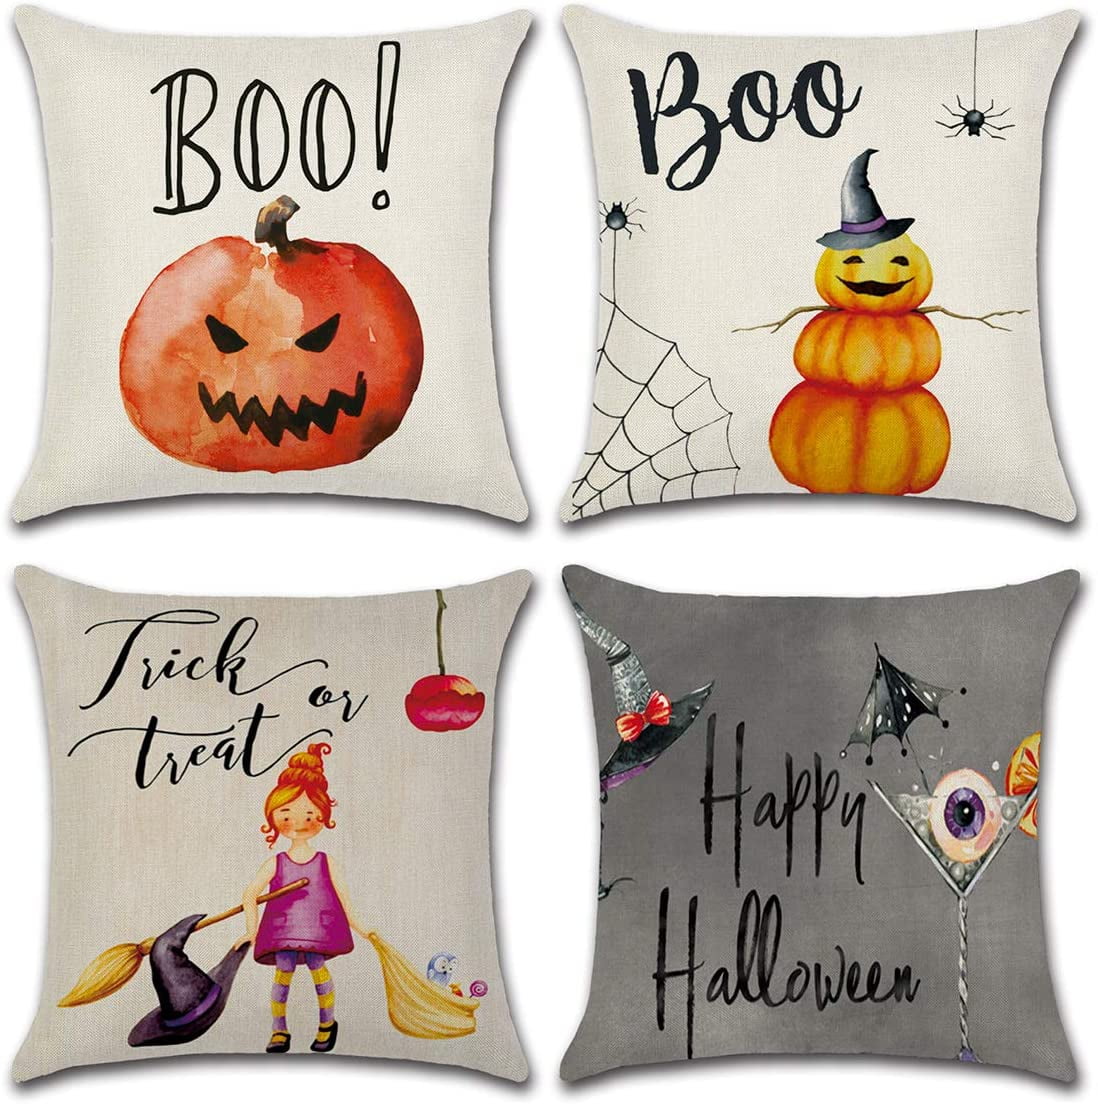 Holiday 365 Holiday Halloween The Cutest Little Pumpkins Call Me Memaw Throw Pillow 18x18 Multicolor